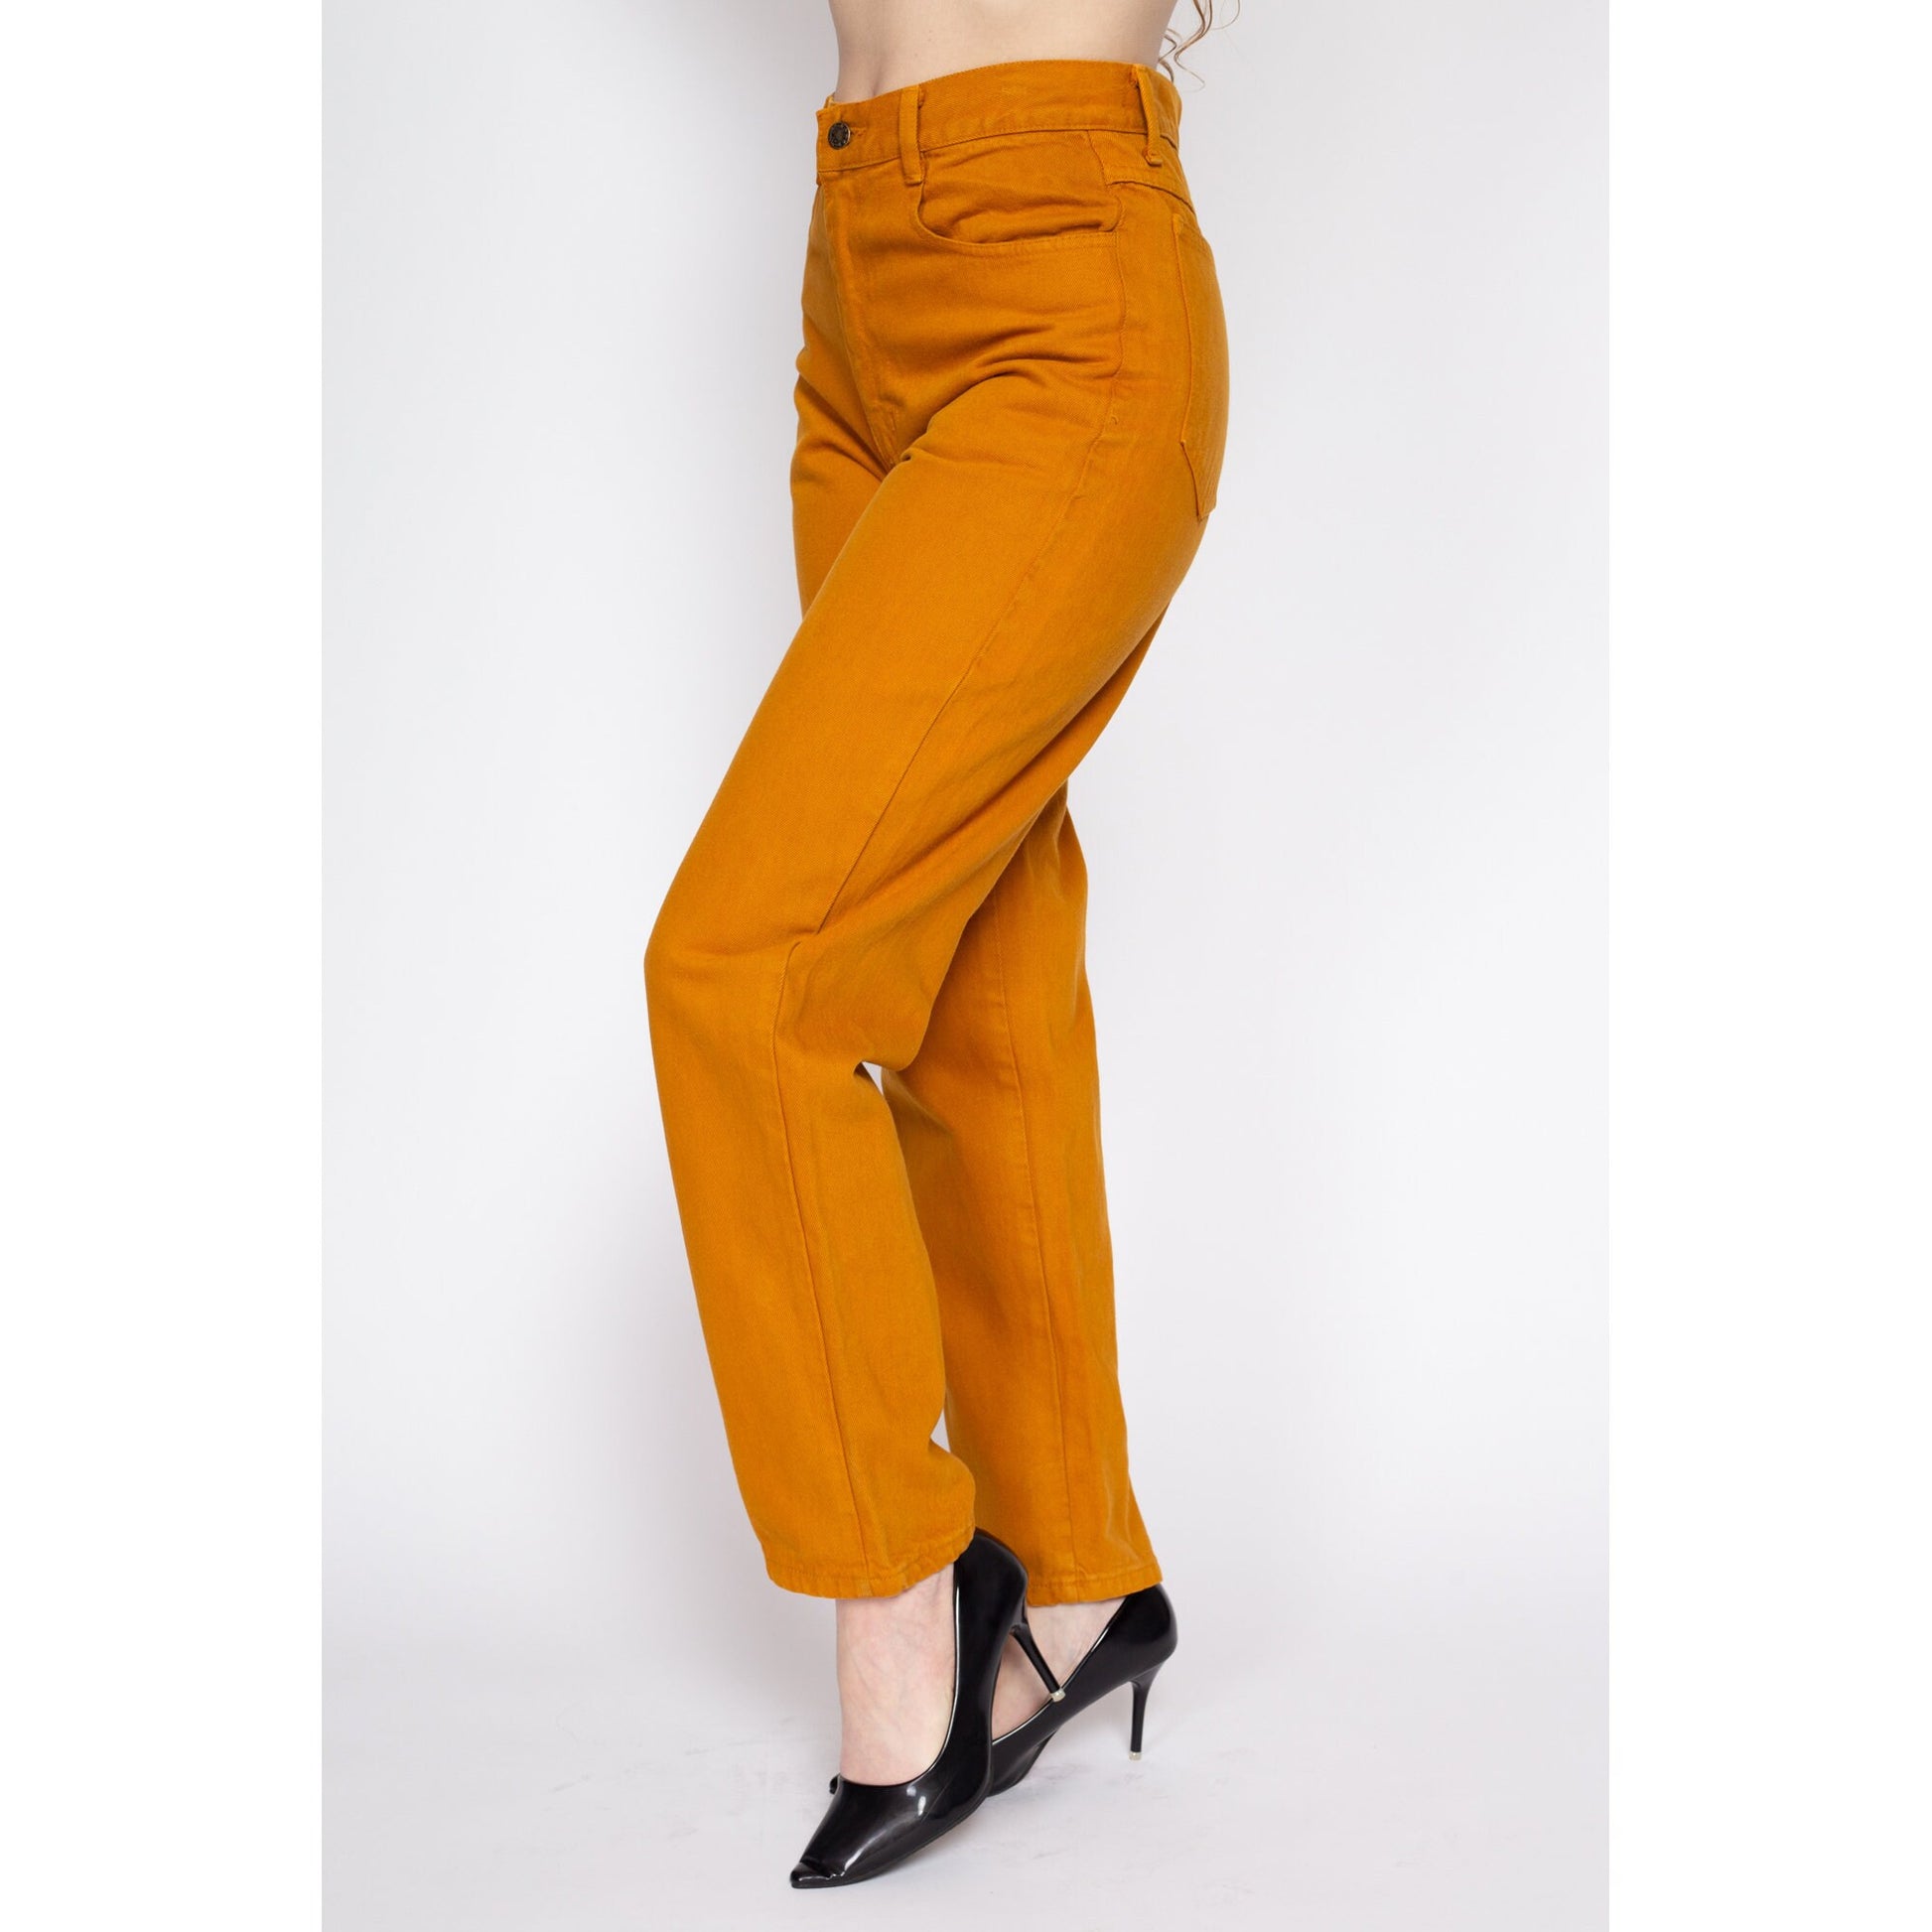 Vintage Orange 80s High Waisted Pants W29 Baggy Mom Pants Tapered